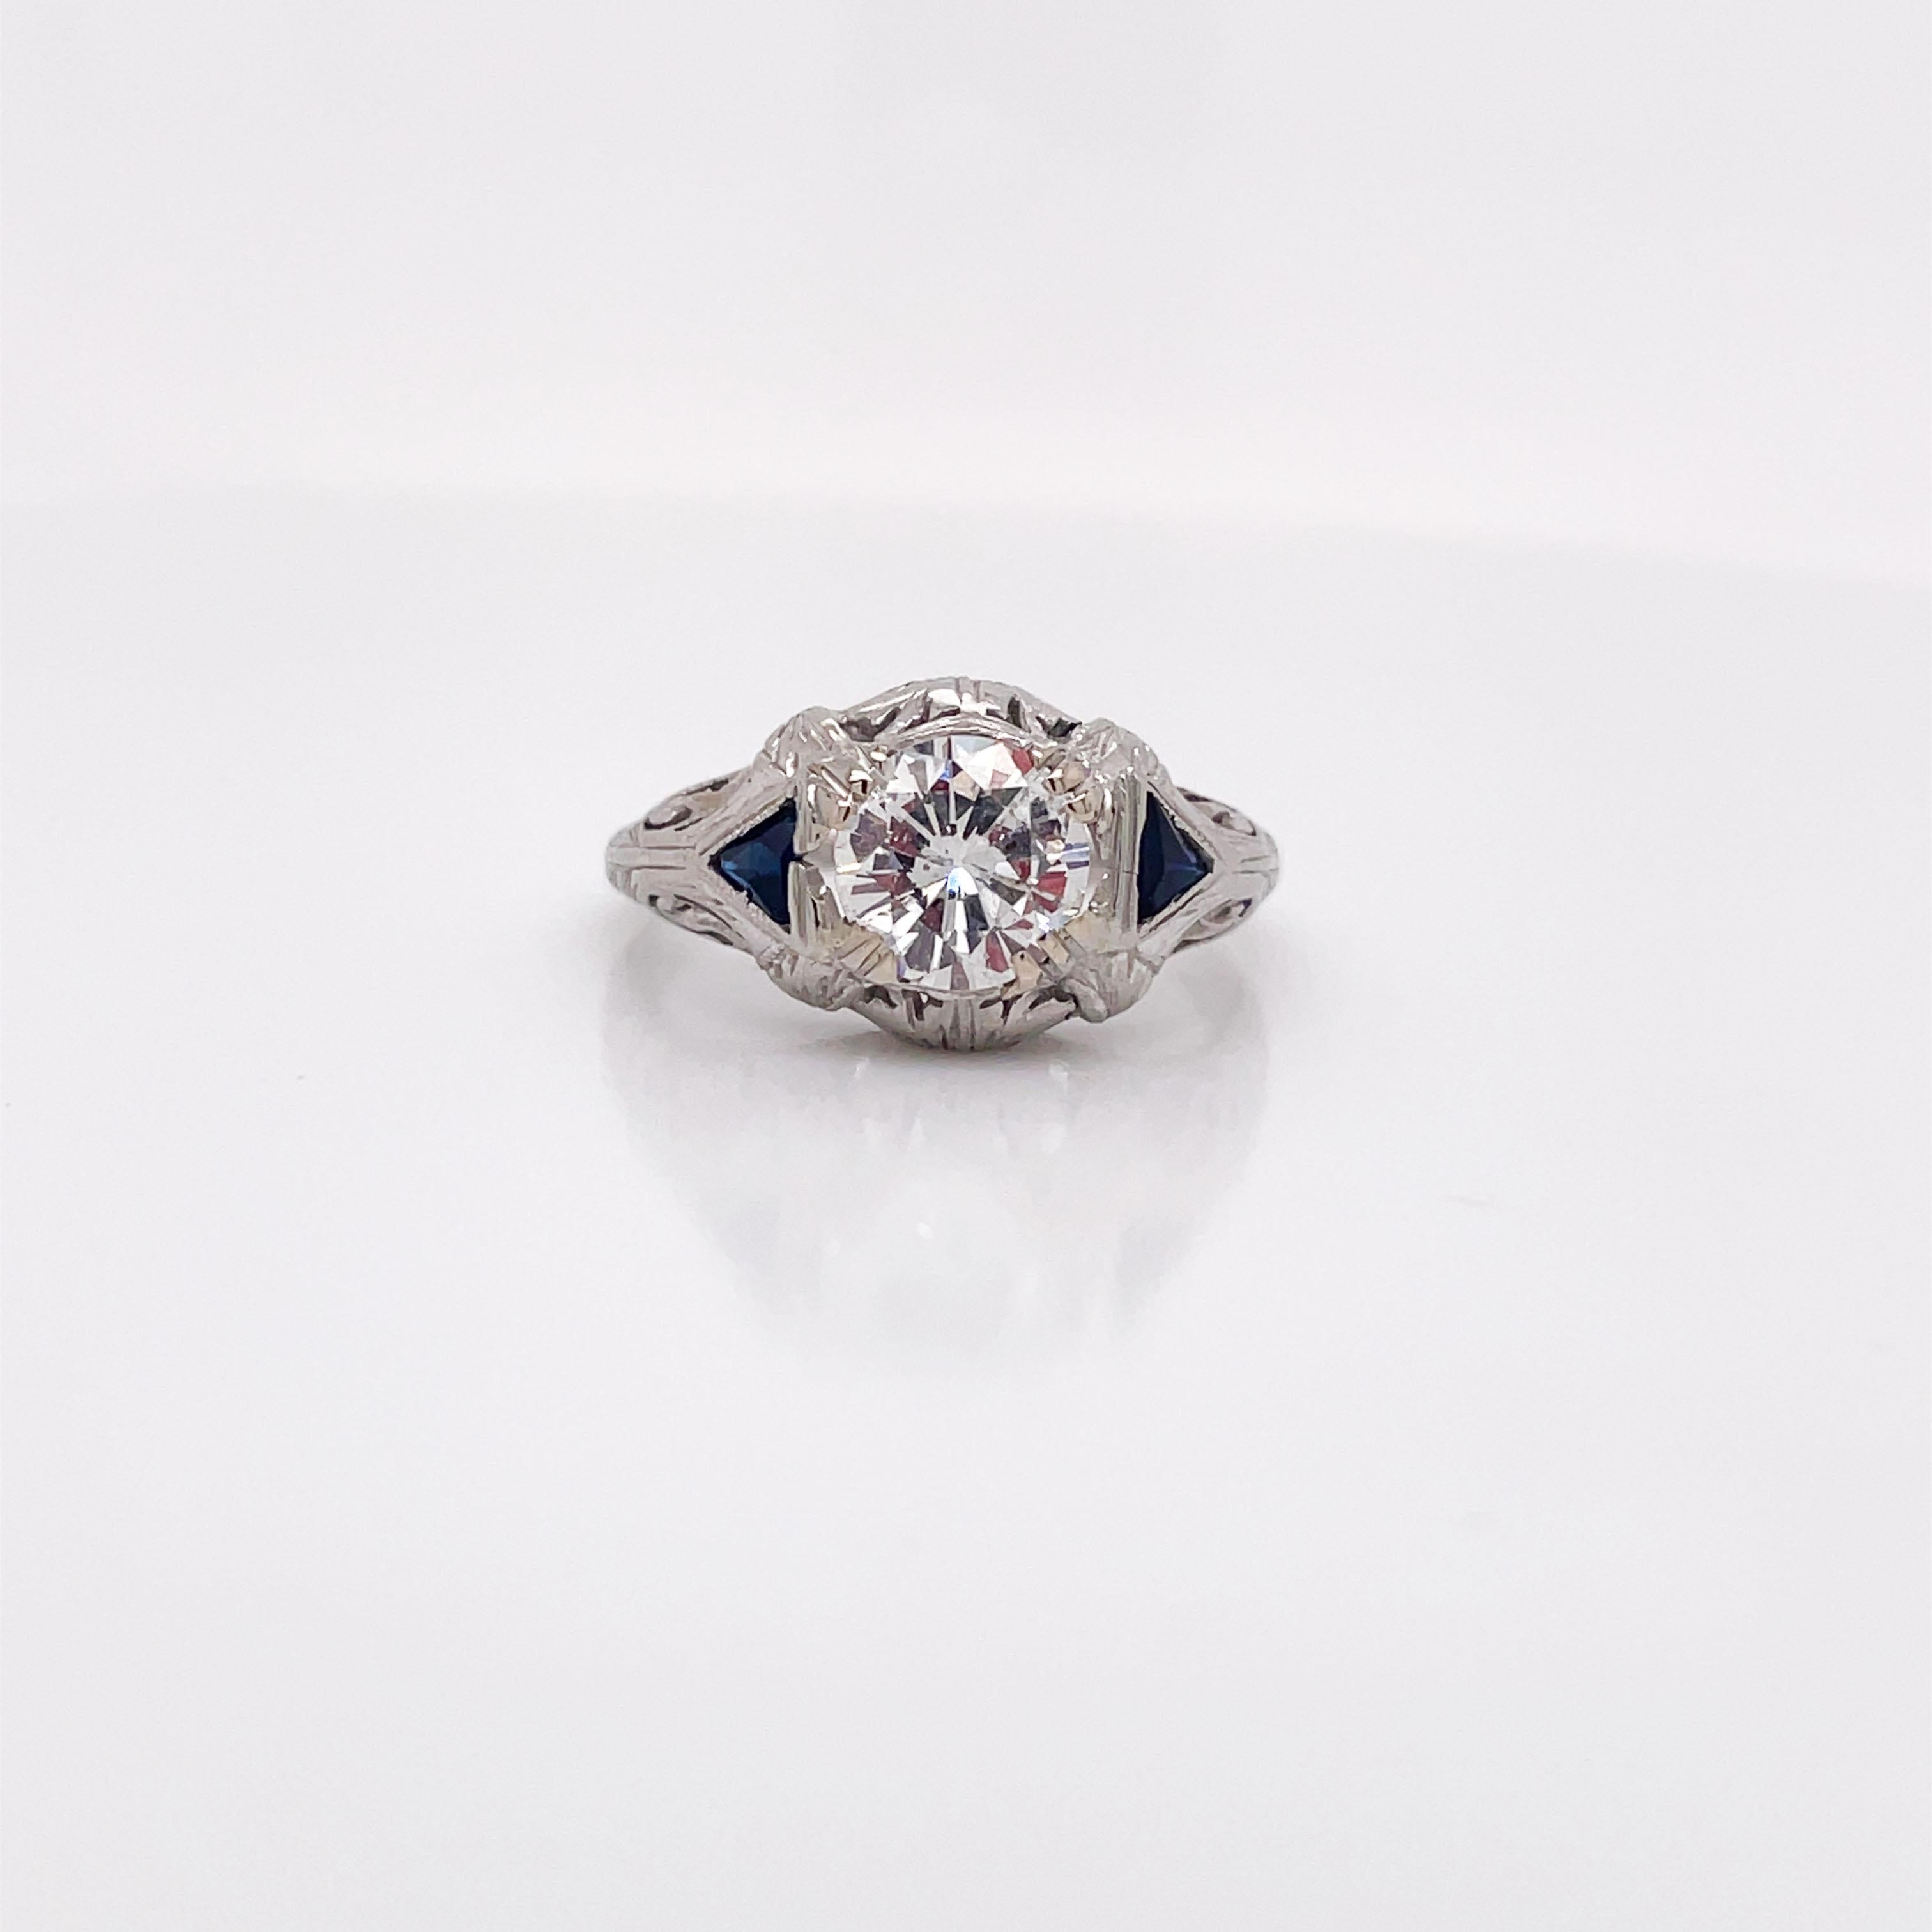 This is an amazing Art Deco diamond and synthetic sapphire ring set in 18K white gold! Adorned with gorgeous and intricate filigree, this ring holds the charm of the Art Deco period. At the center of the ring, is a gorgeous glimmering 0.96ct Euro